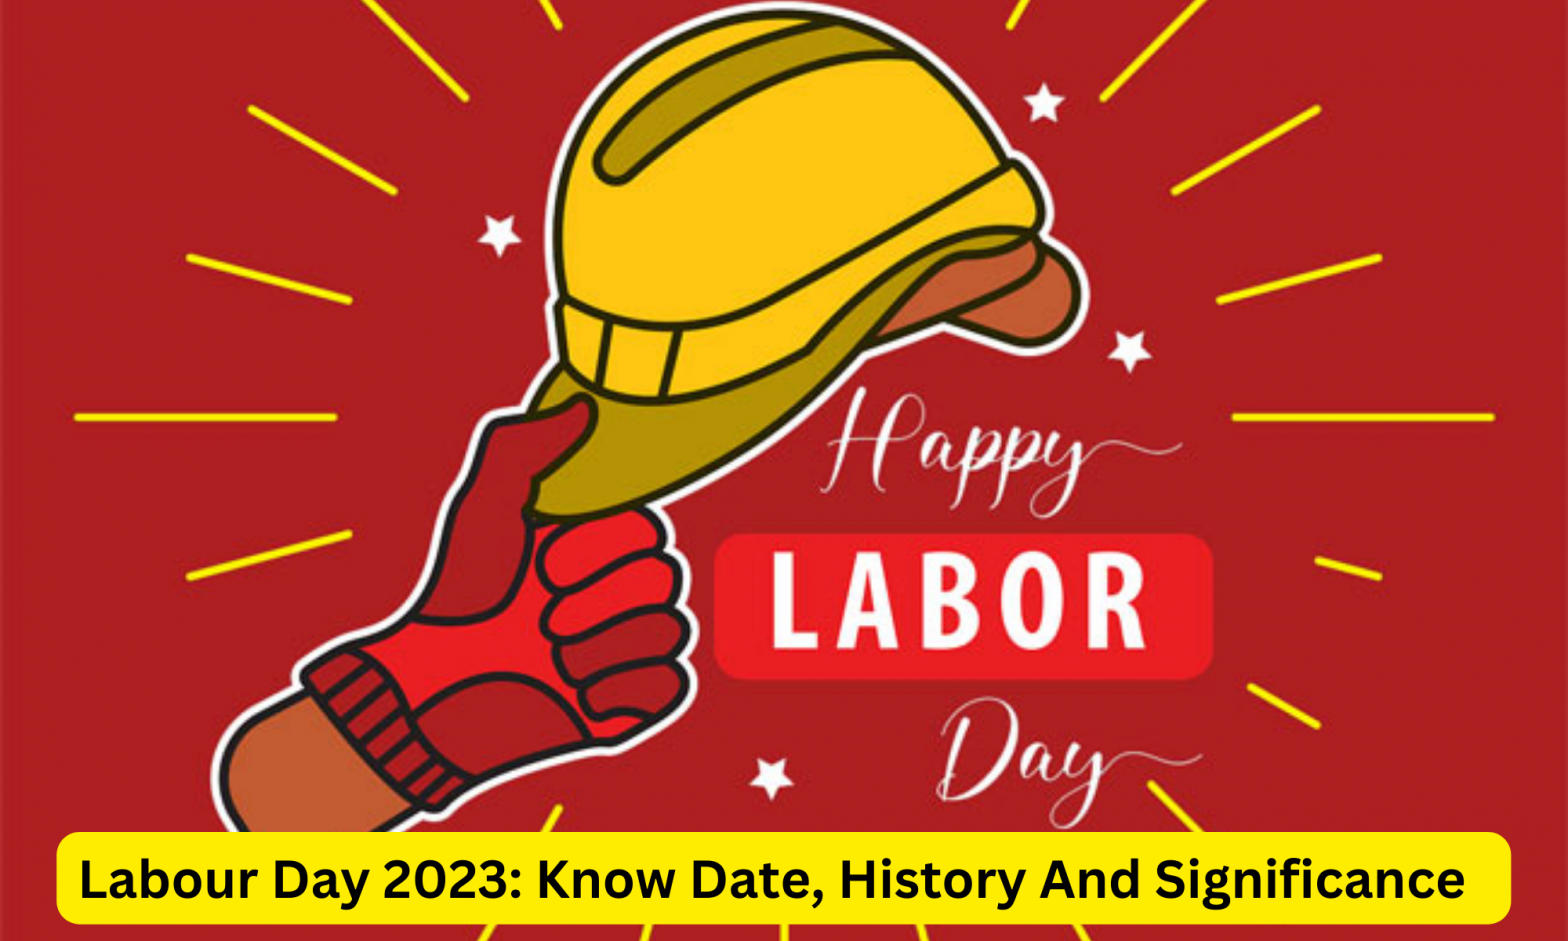 Labour Day 2023: Know Date, History And Significance